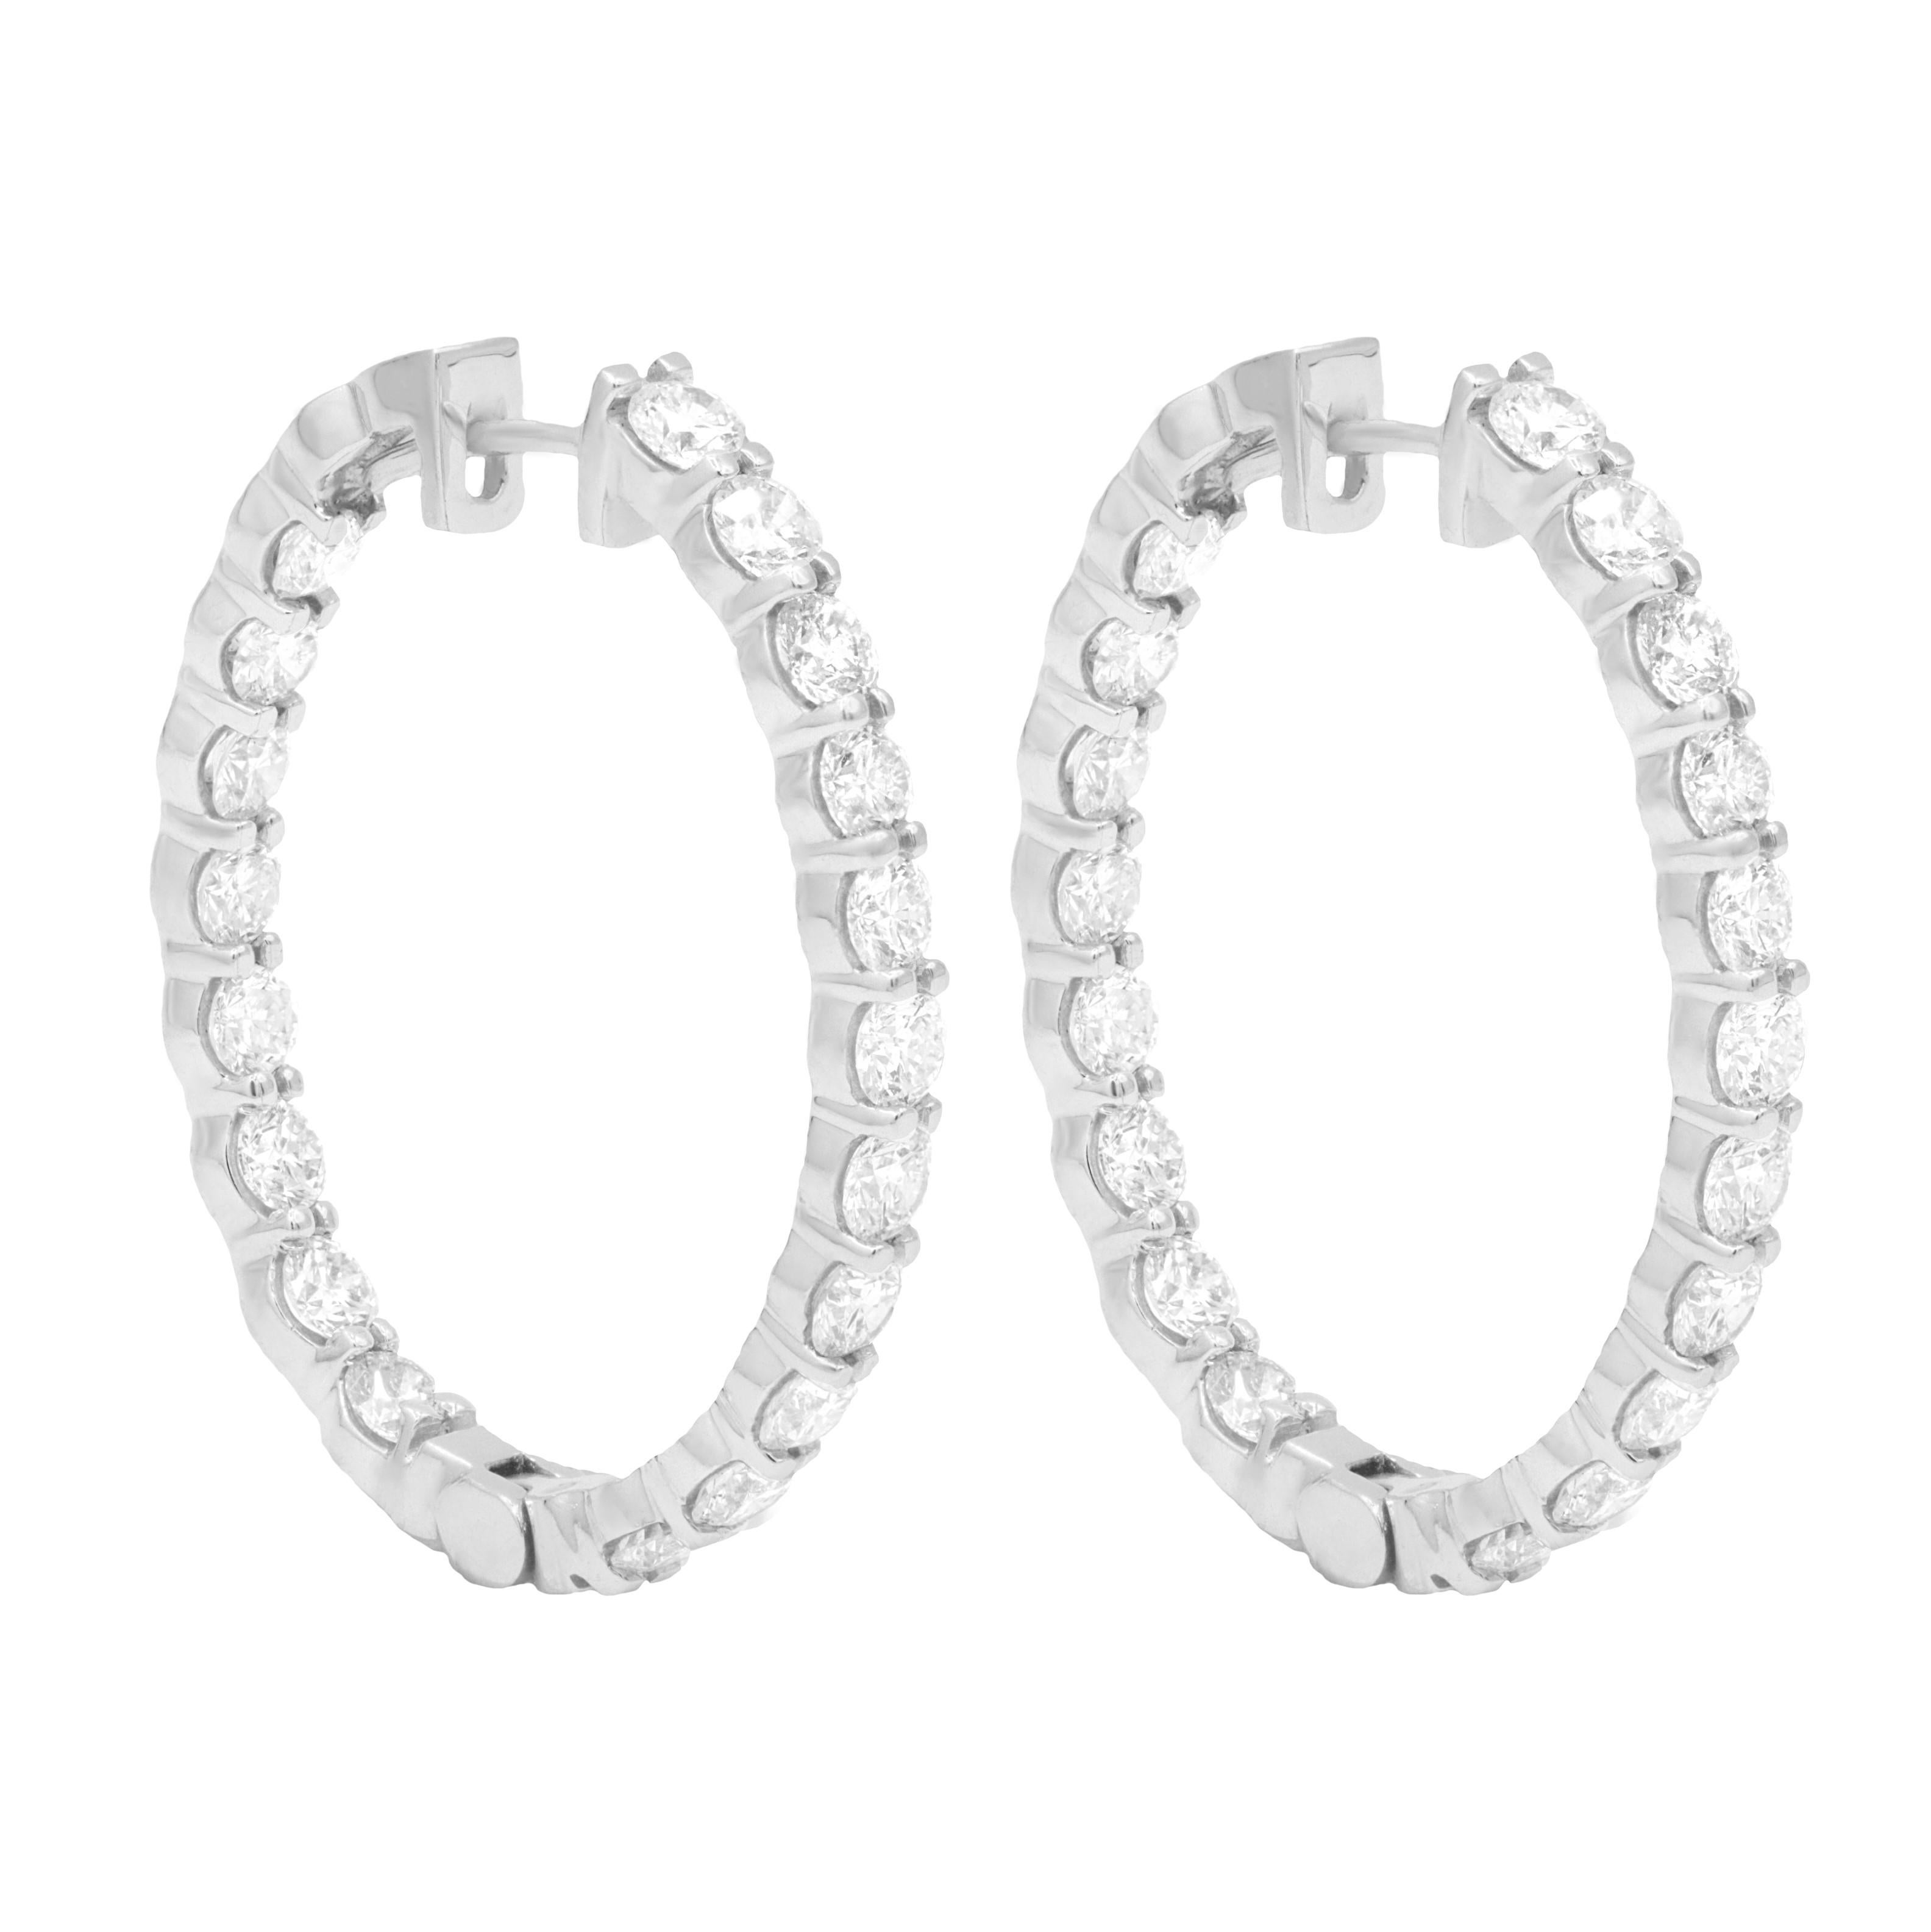 18K White Gold Diamond Earrings featuring 8.12 Carat T.W. of Natural Diamonds

Underline your look with this sharp 18K White Gold Diamond Earrings. High quality Diamonds. This Earrings will underline your exquisite look for any occasion.

. is a